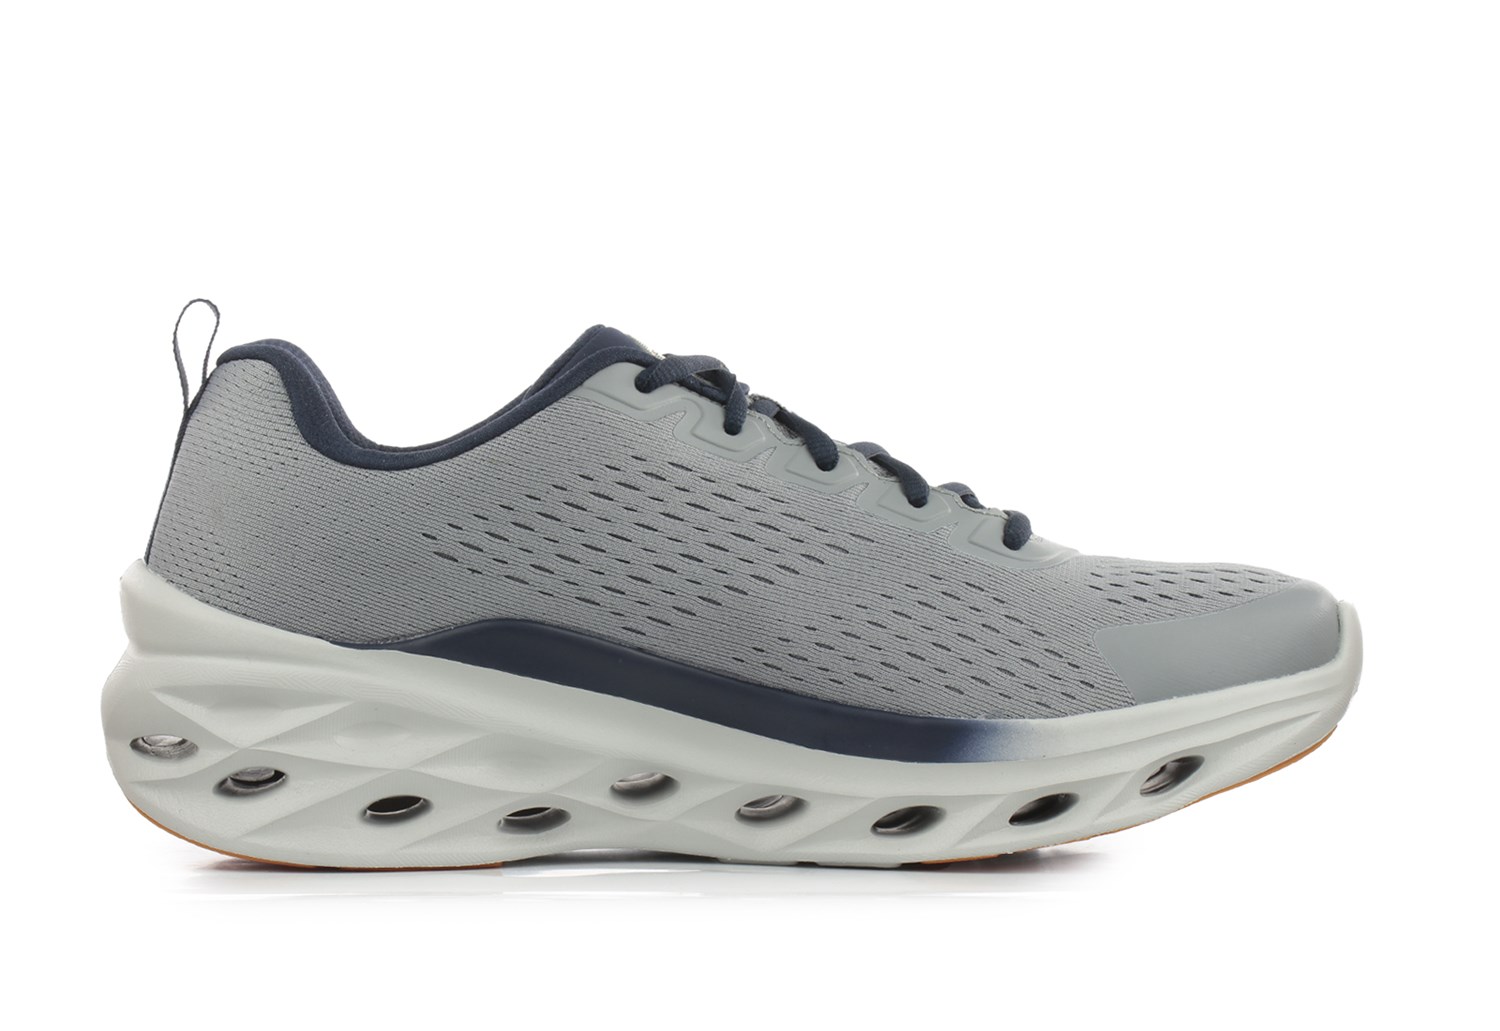 Skechers Glide Step Swift - Frayment 232634 Gray / blue Shoes Man 